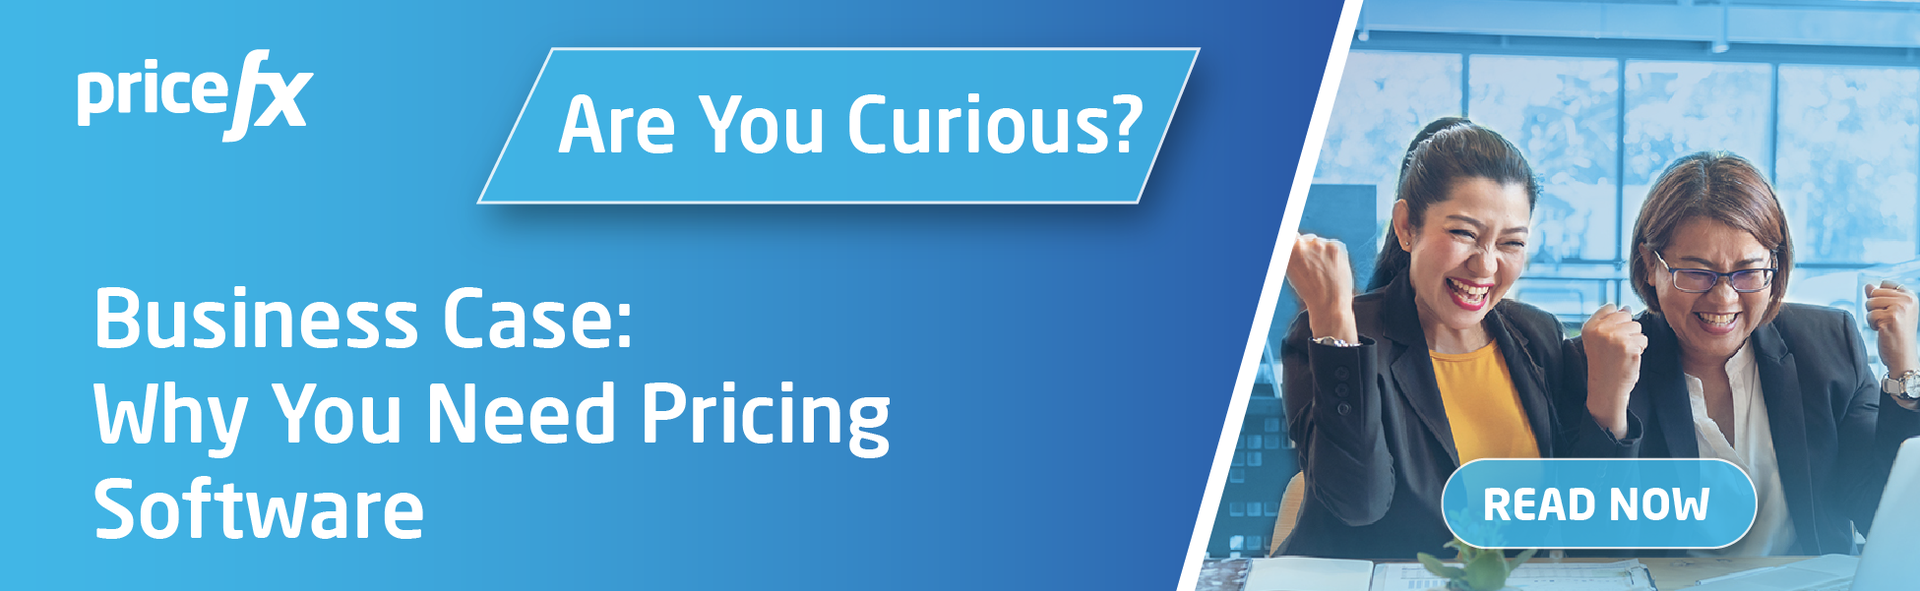 CTA-Why-You-Need-Pricing-Software-Building-A-Business-Case